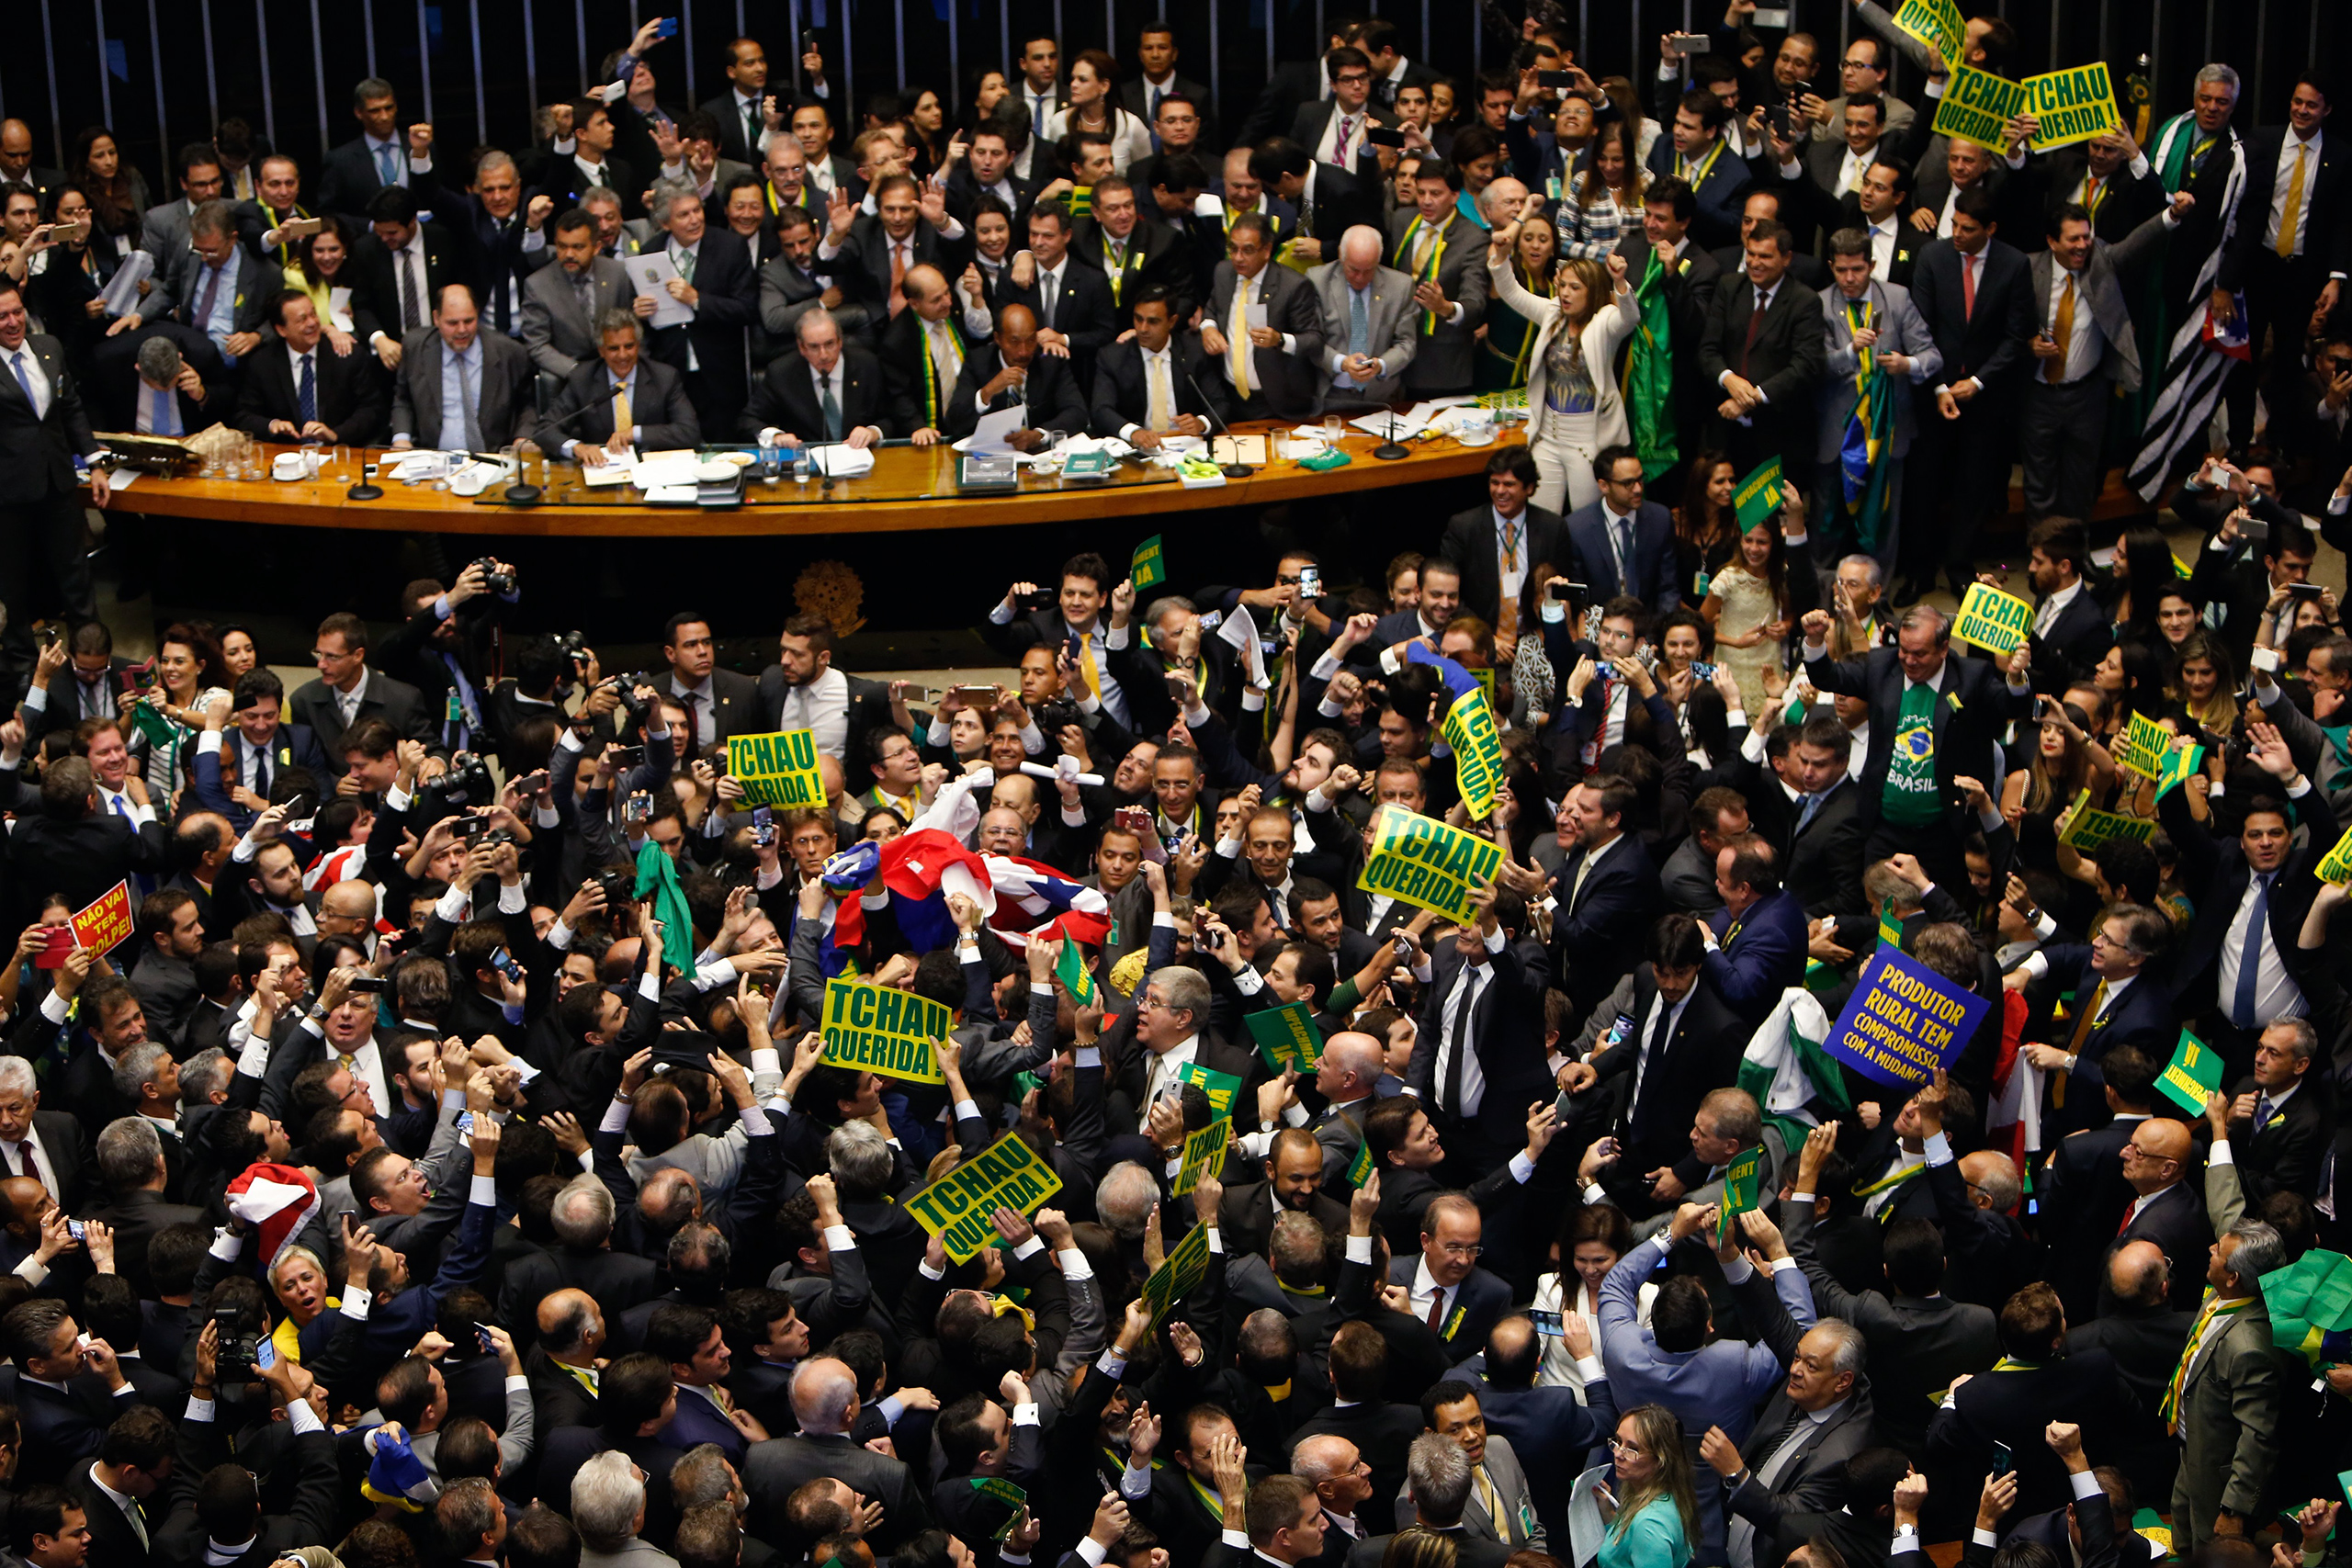 Deputies of the Lower House of Congress vote on whether to impeach President Dilma Rousseff in Brasilia, Brazil, April 17, 2016. (Igo Estrela—Getty Images)